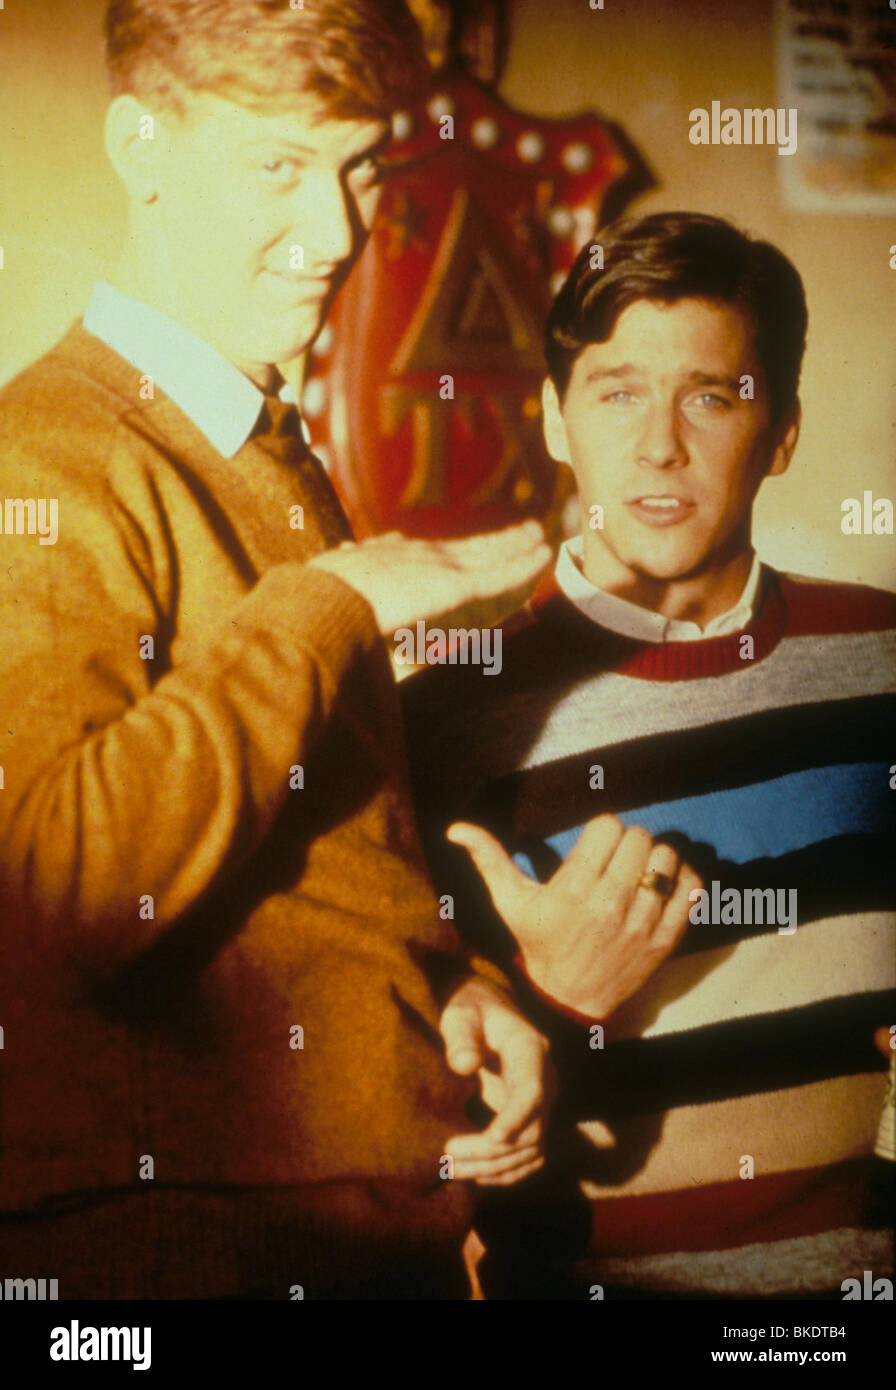 NATIONAL LAMPOON'S ANIMAL HOUSE (1978) PETER WIDDOES, TIM MATHESON NLA 029 Stock Photo